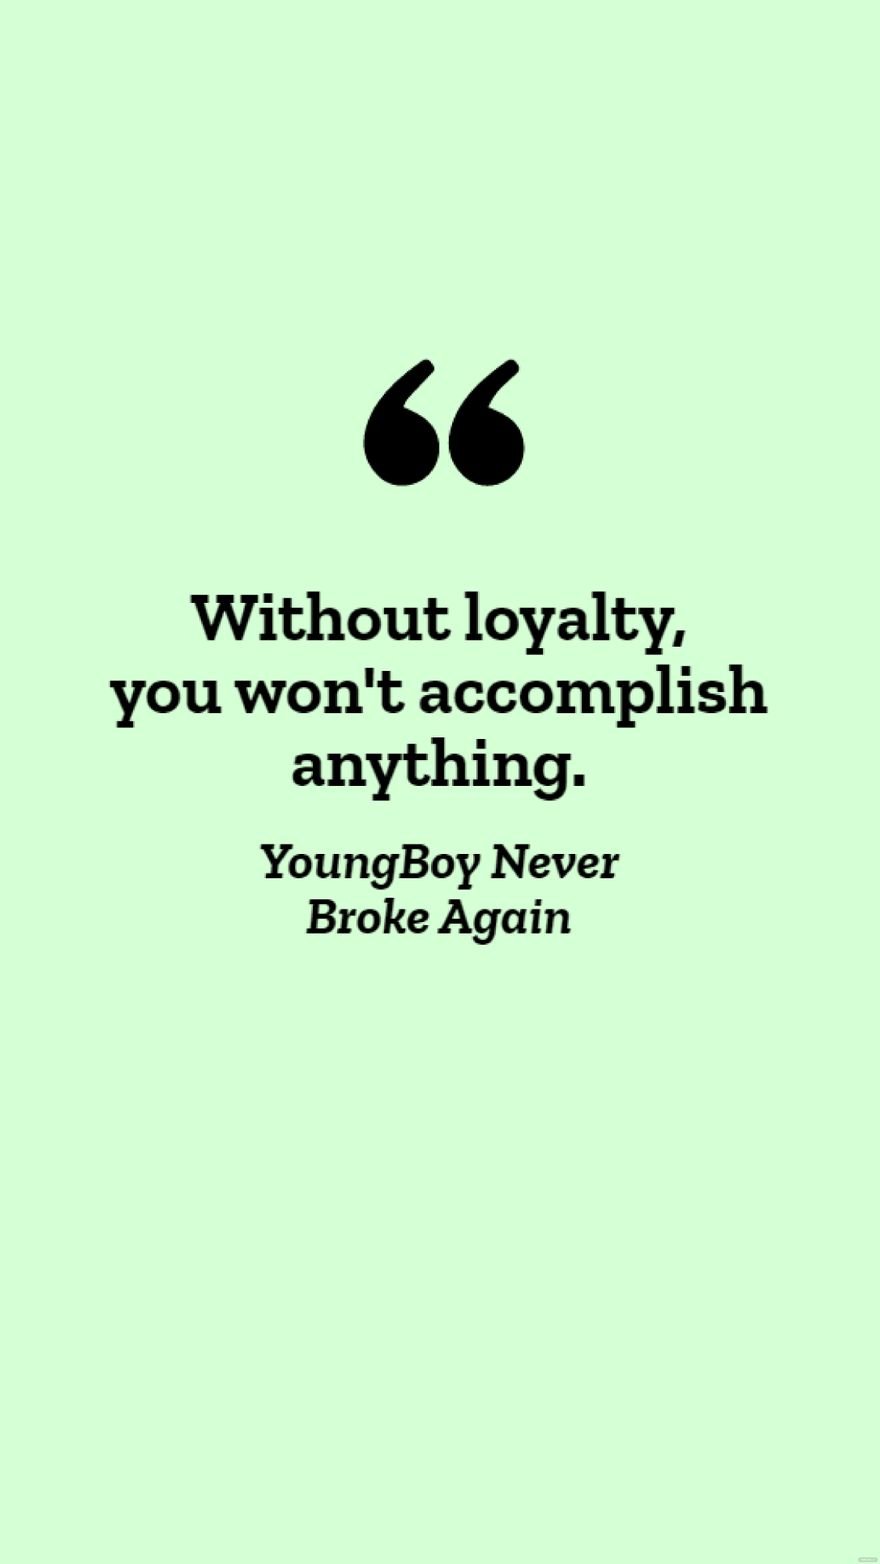 Free YoungBoy Never Broke Again - Without loyalty, you won't accomplish anything. in JPG